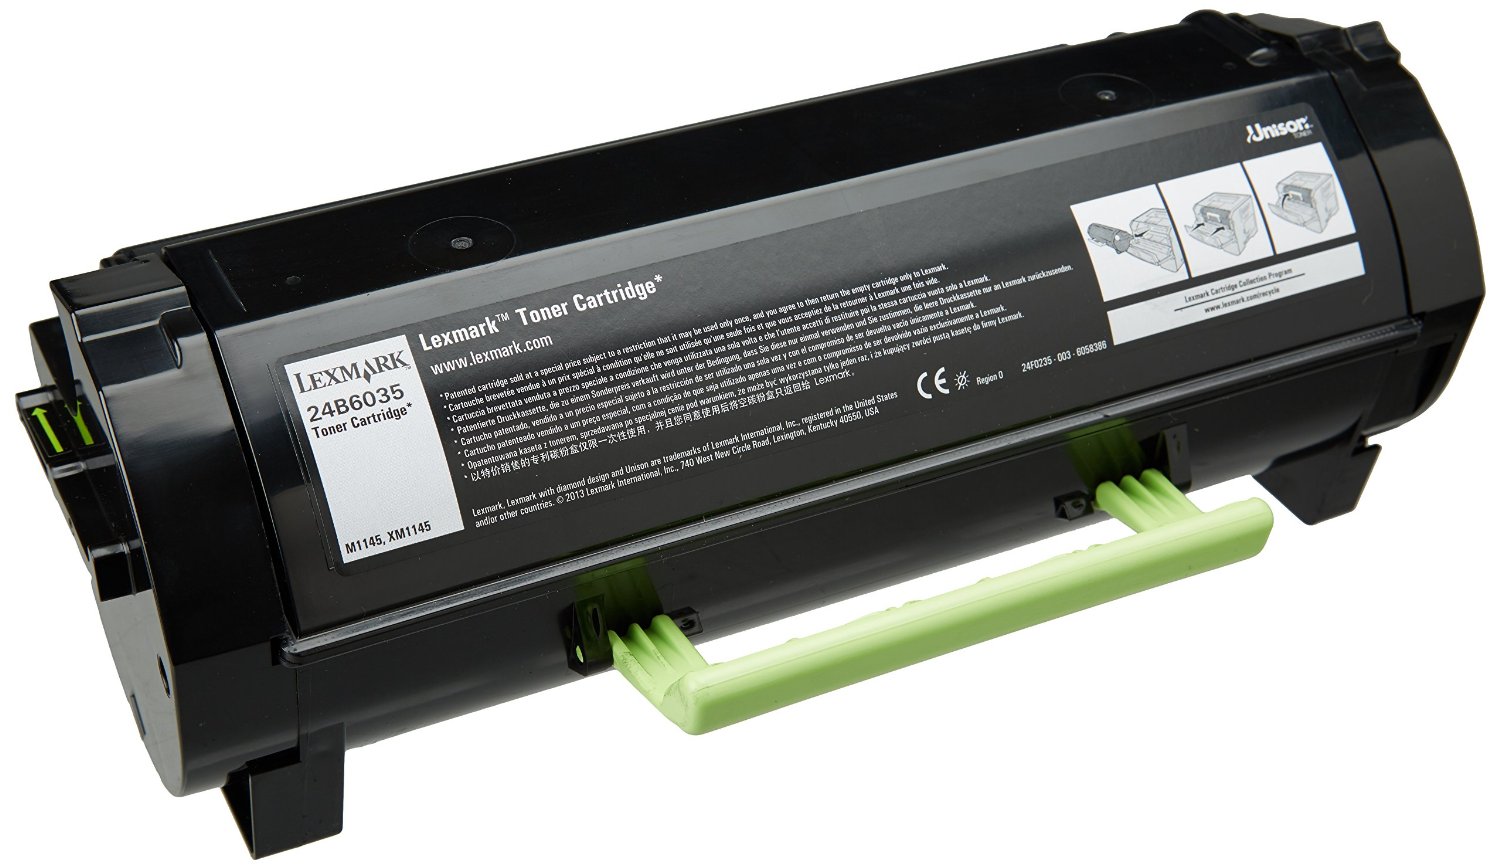 Lexmark 24B6035 G2491 16K Yield MADE IN CANADA Remanufactured Toner for M1145 XM1145 MFP